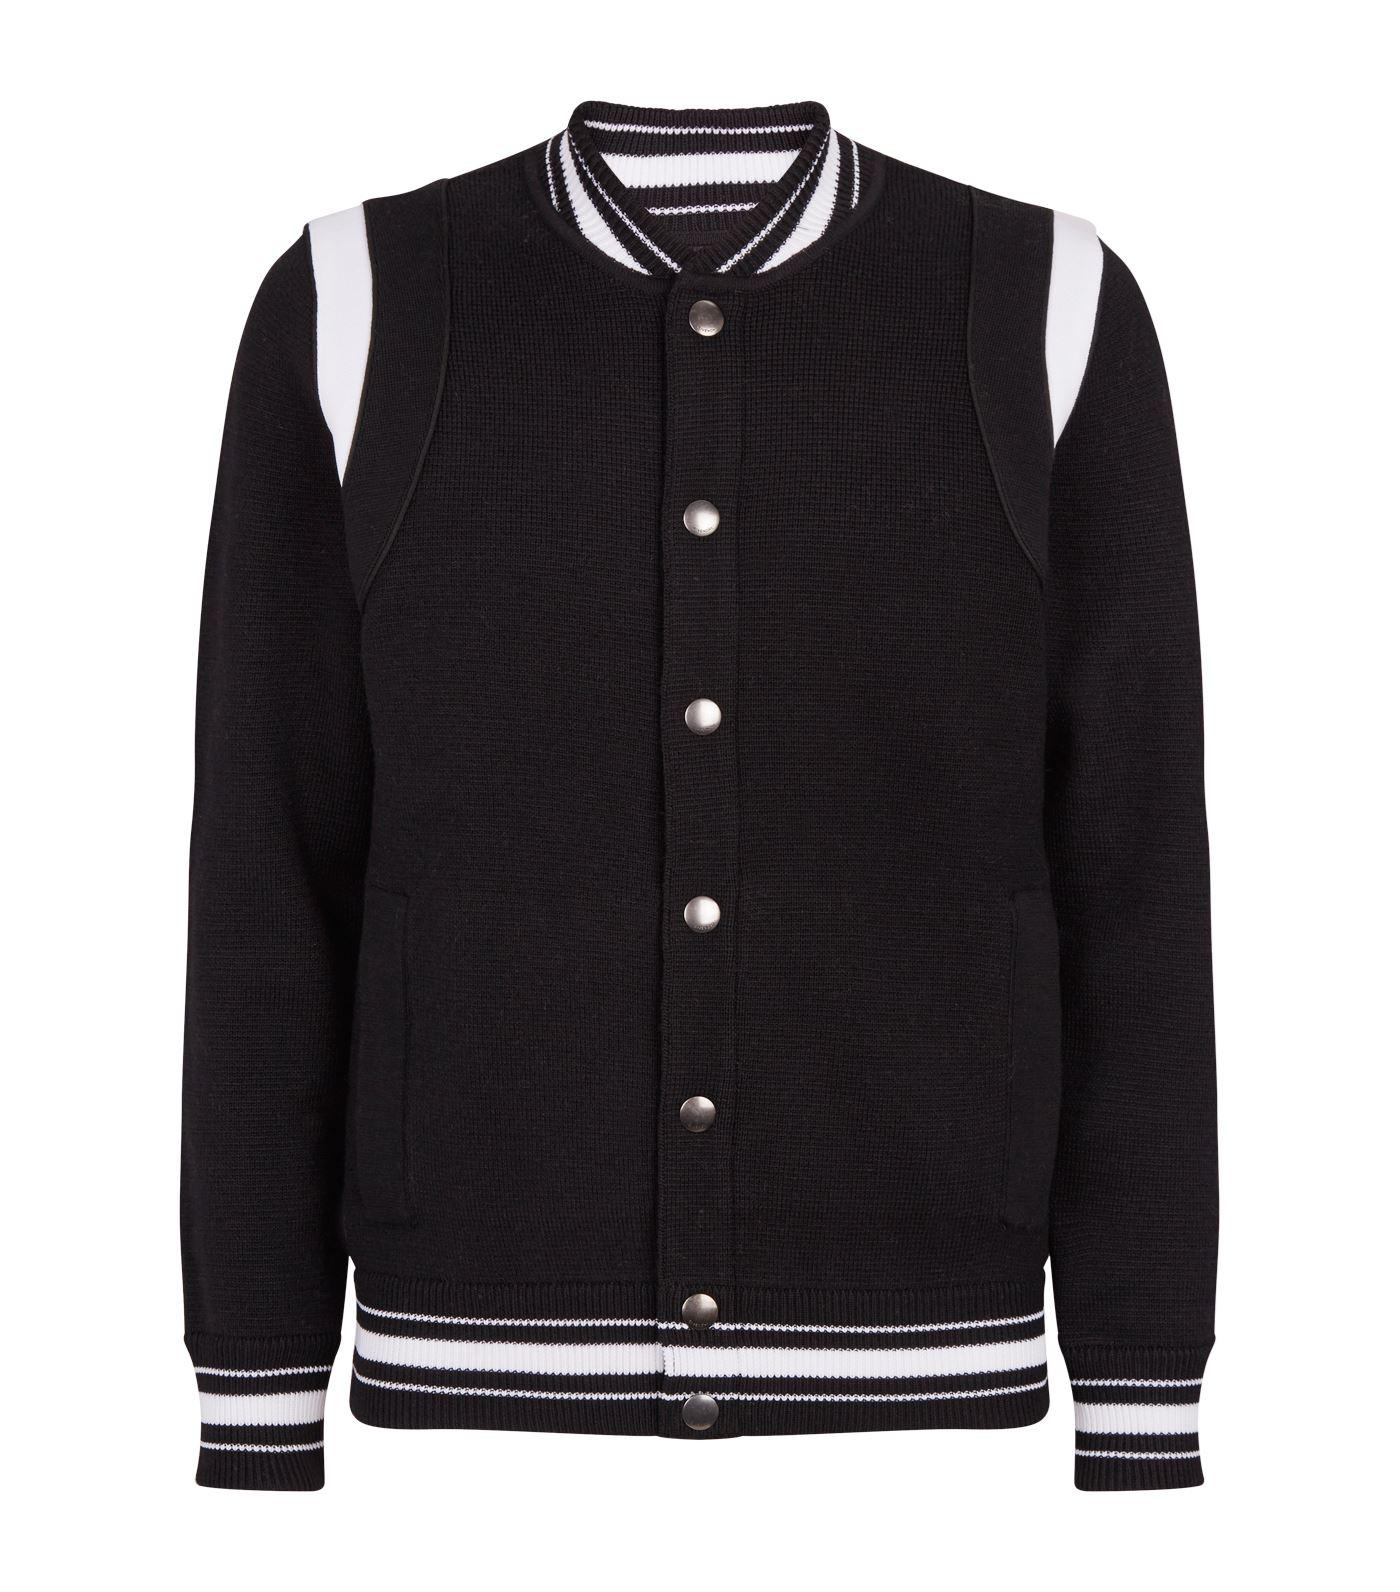 Givenchy Knit Wool Varsity Bomber Jacket in Black for Men - Save 56% - Lyst